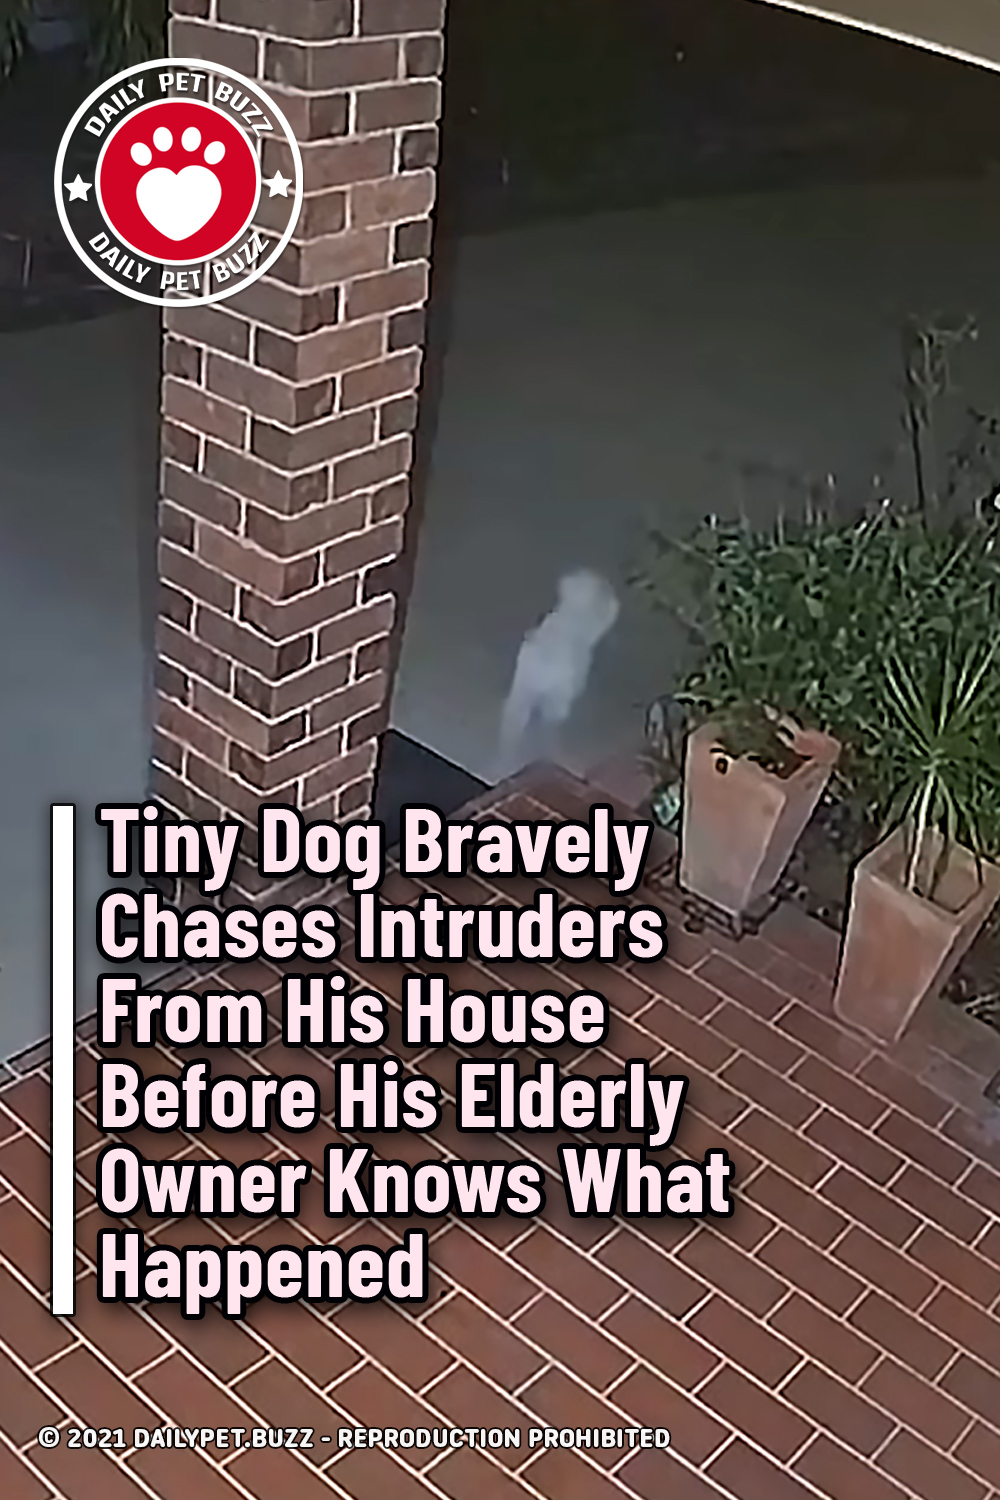 Tiny Dog Bravely Chases Intruders From His House Before His Elderly Owner Knows What Happened